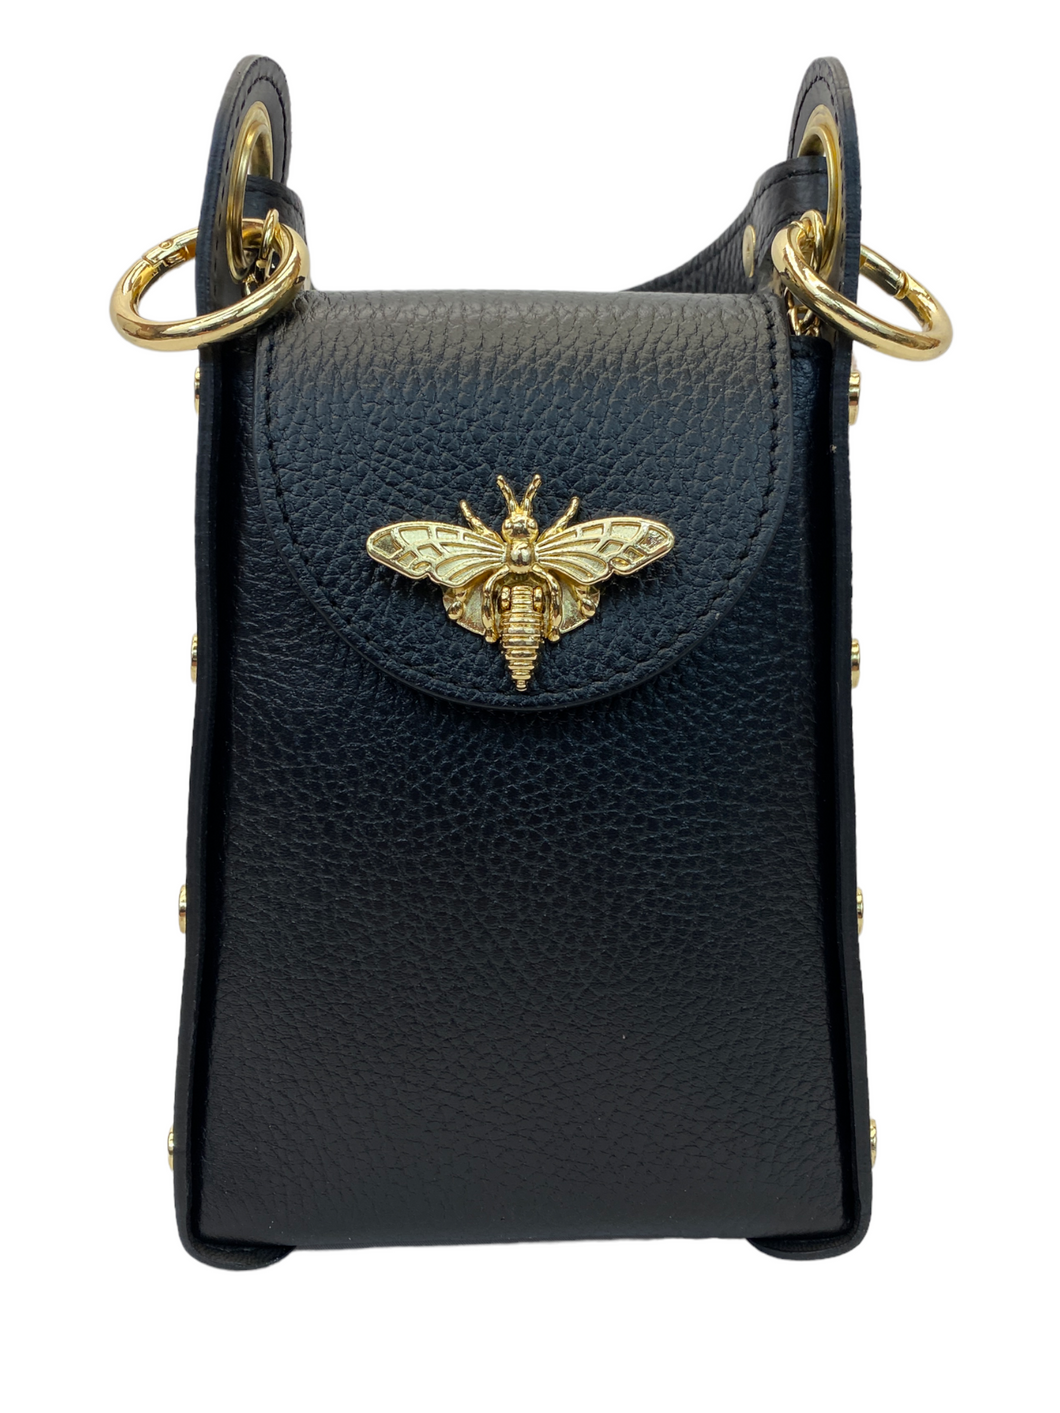 GF Bumble Bee Leather Cellphone Bag